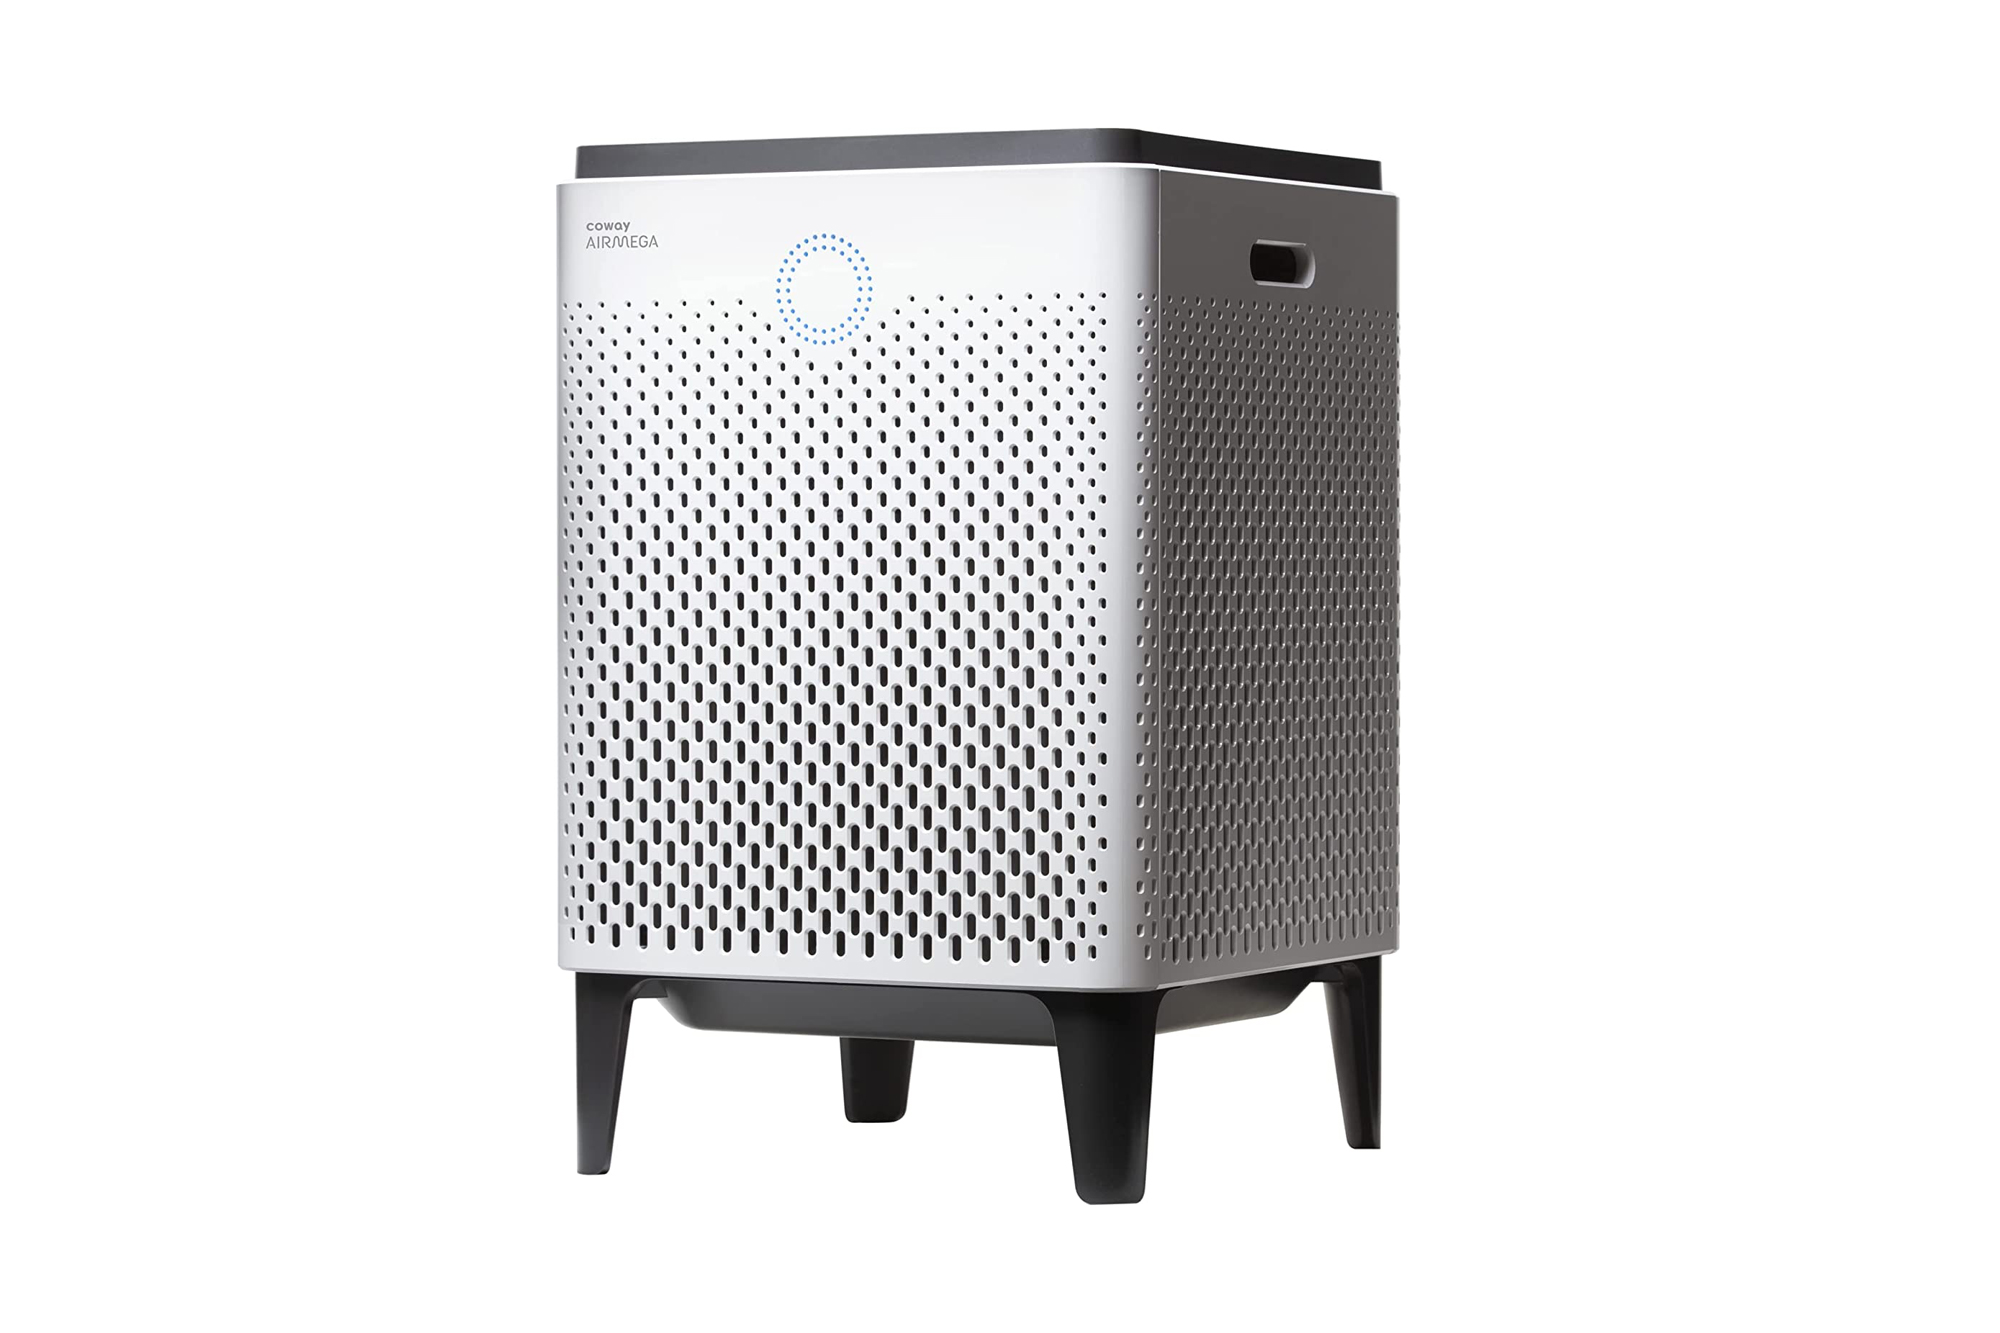 The 16 of Best Air Purifiers of 2024, Tested and Reviewed